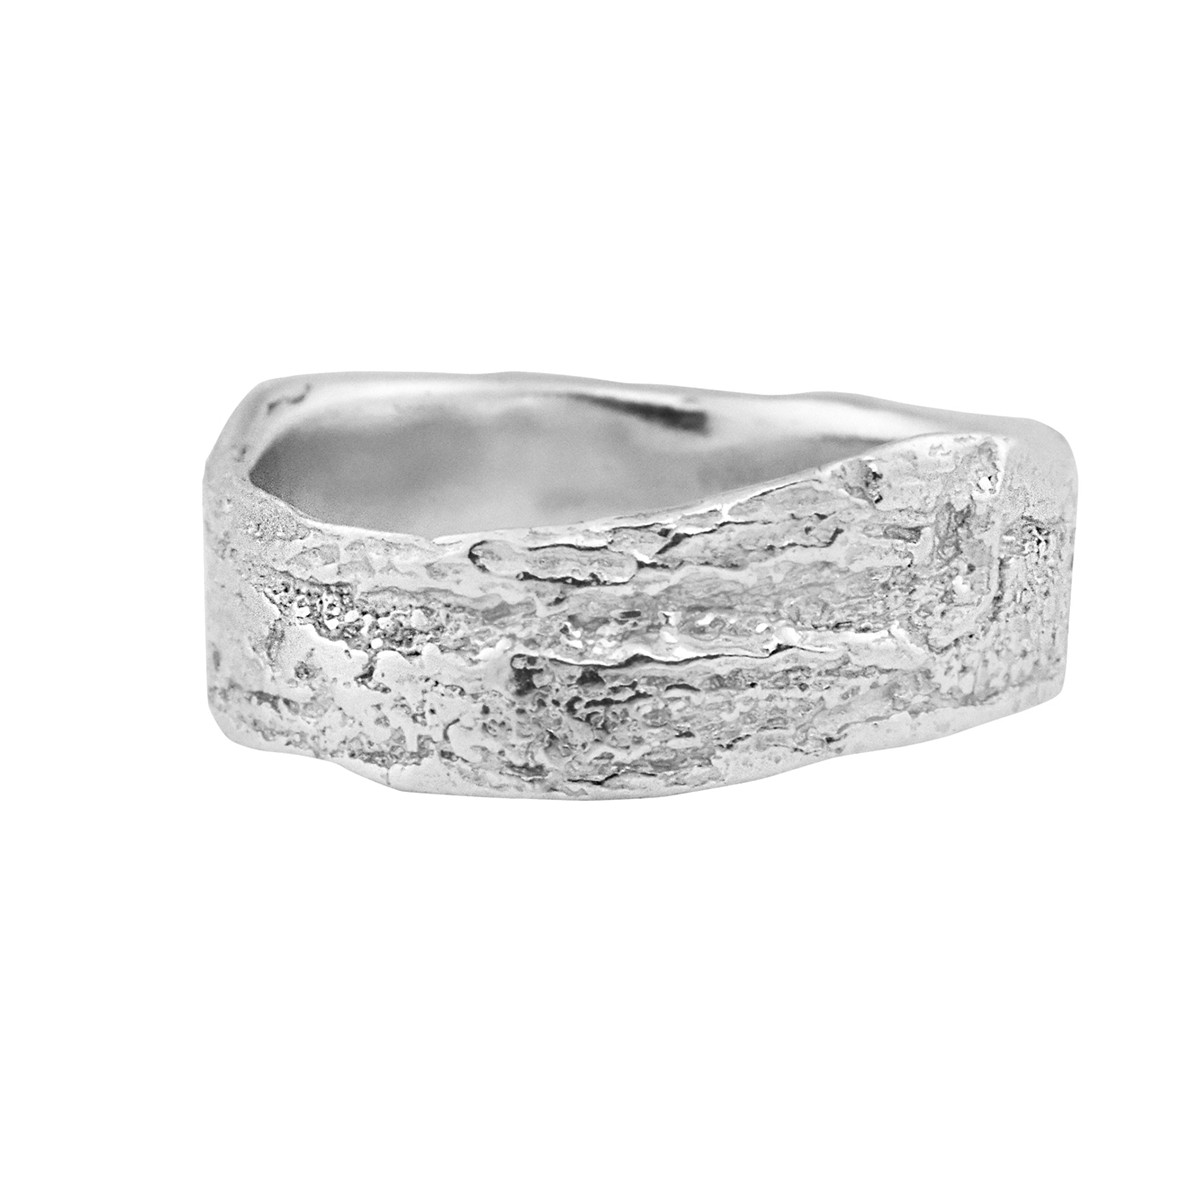 Issy White: Wide London Plane Ring in Silver, tomfoolery